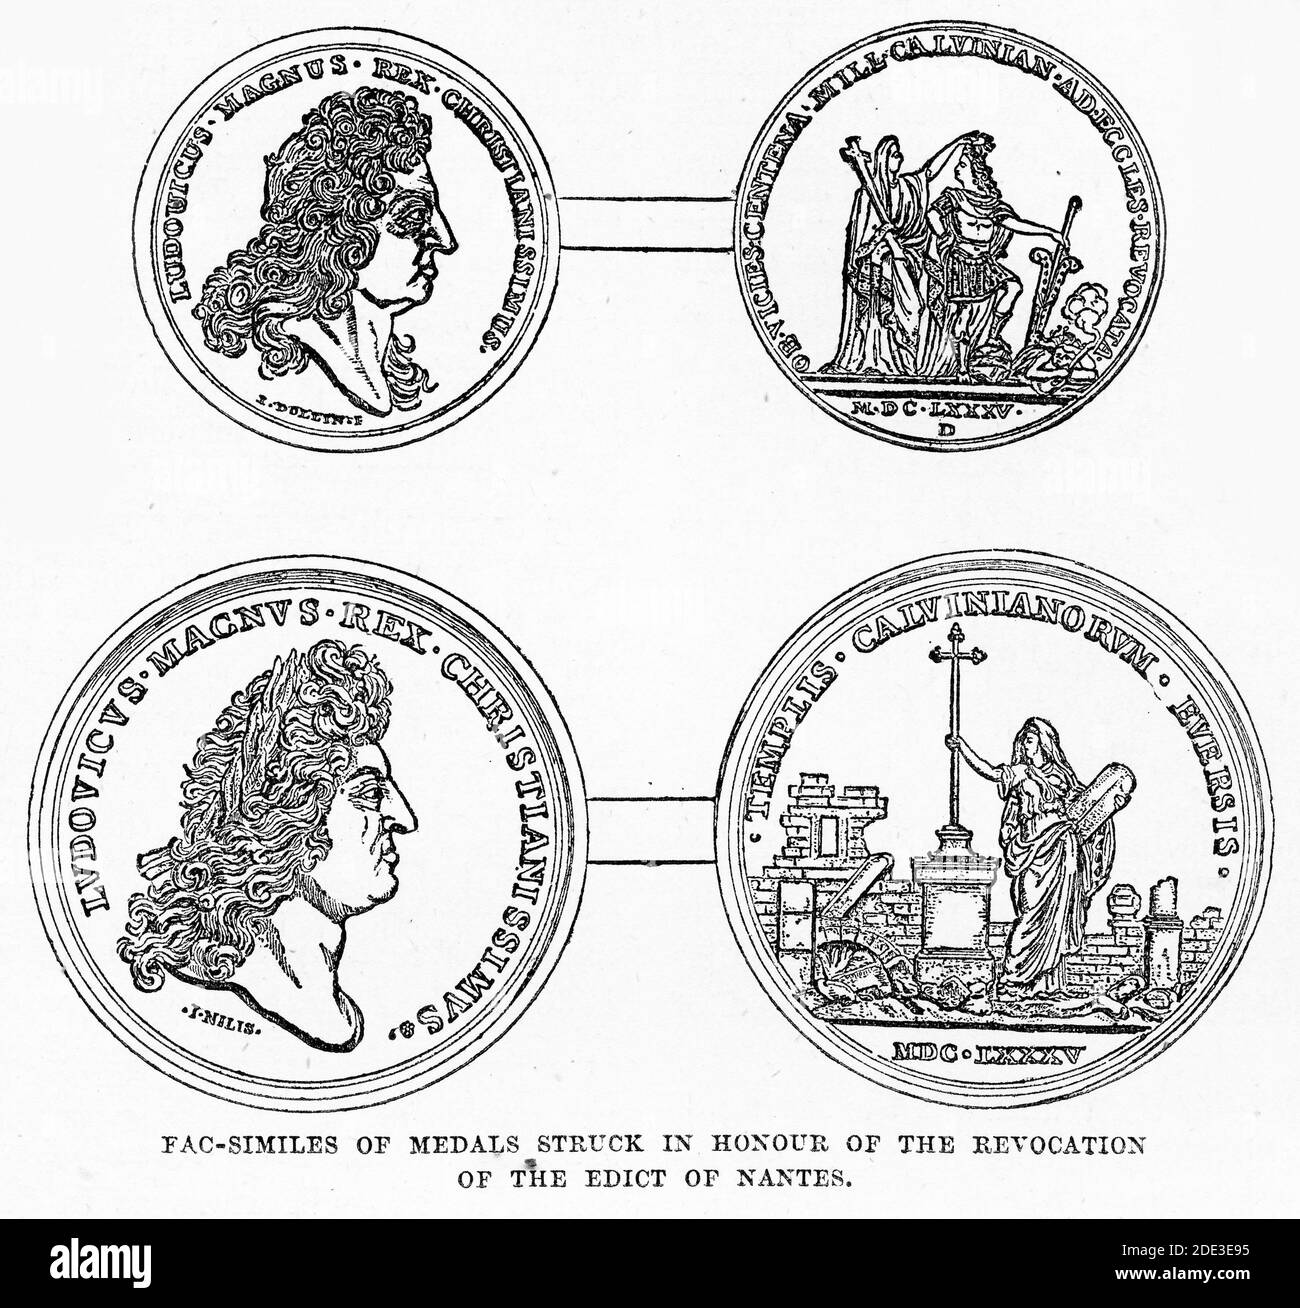 Engraving of medals struck in 1685 to honour the edit of Fontainbleau, which revoked the edict of Nantes and opened the door to persecution of Huguenots. illustration from 'The history of Protestantism' by James Aitken Wylie (1808-1890), pub. 1878 Stock Photo